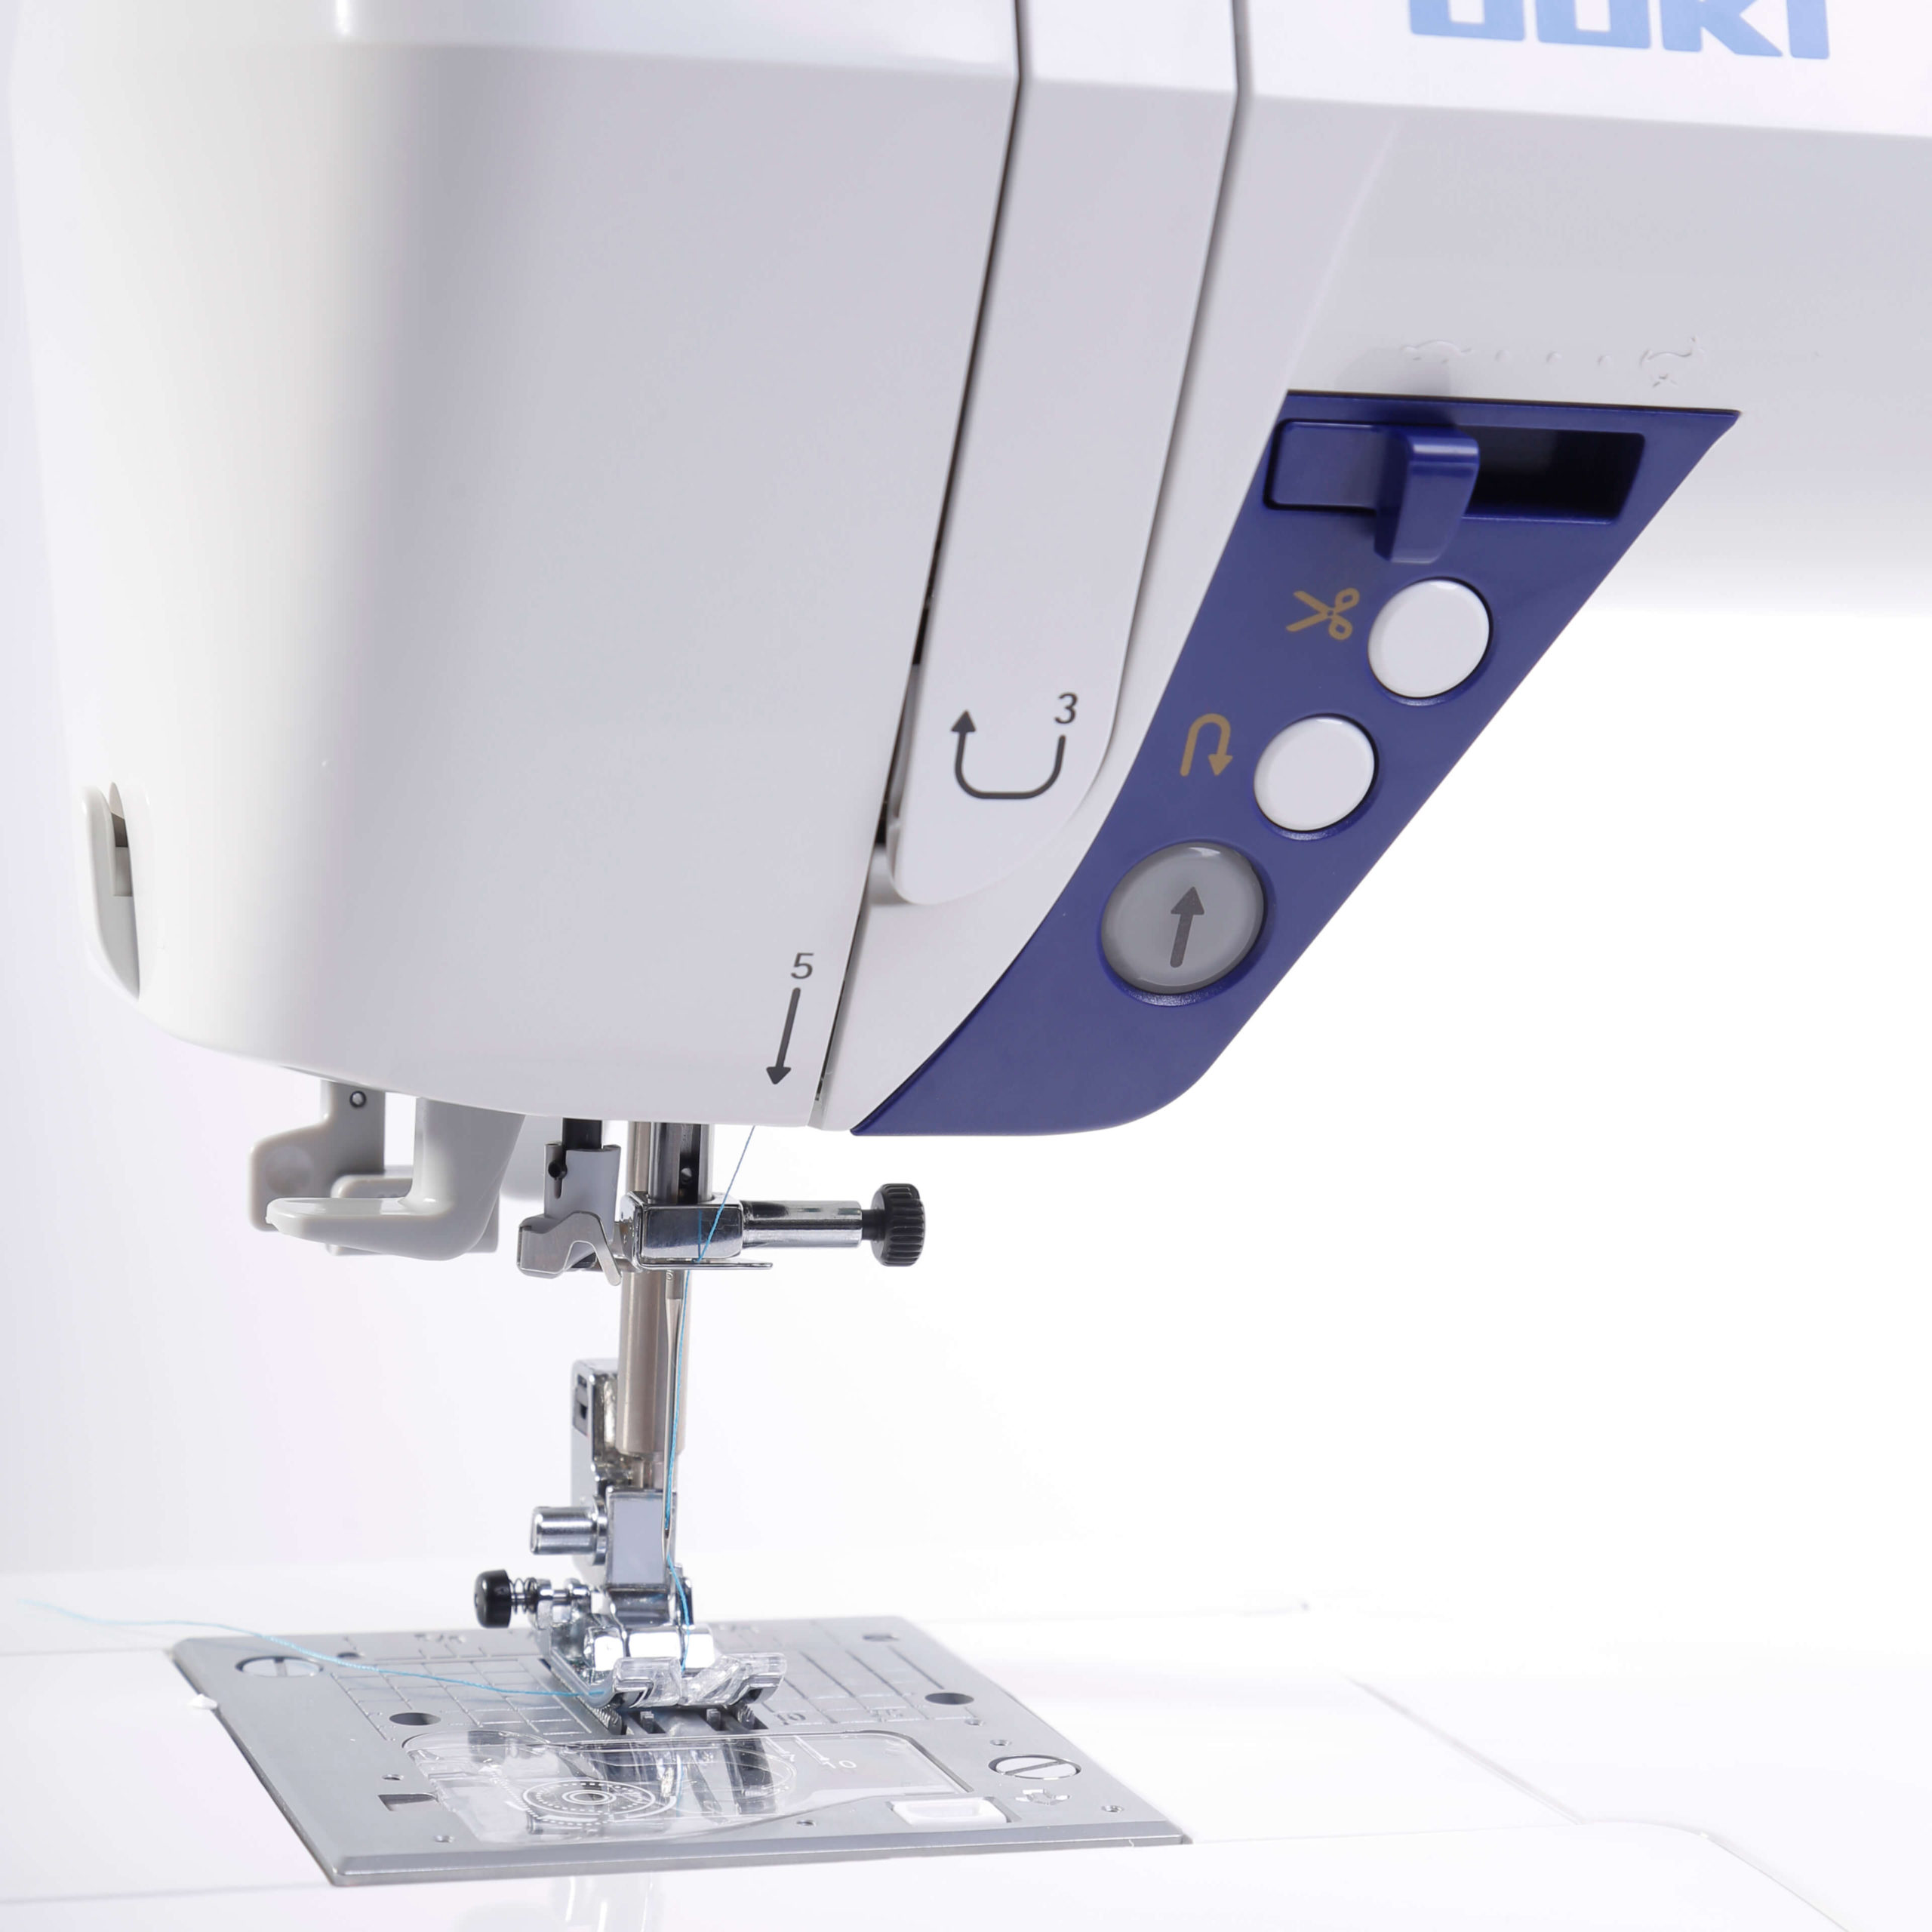 Juki HZL-G220 Computerized Quilting and Sewing Machine